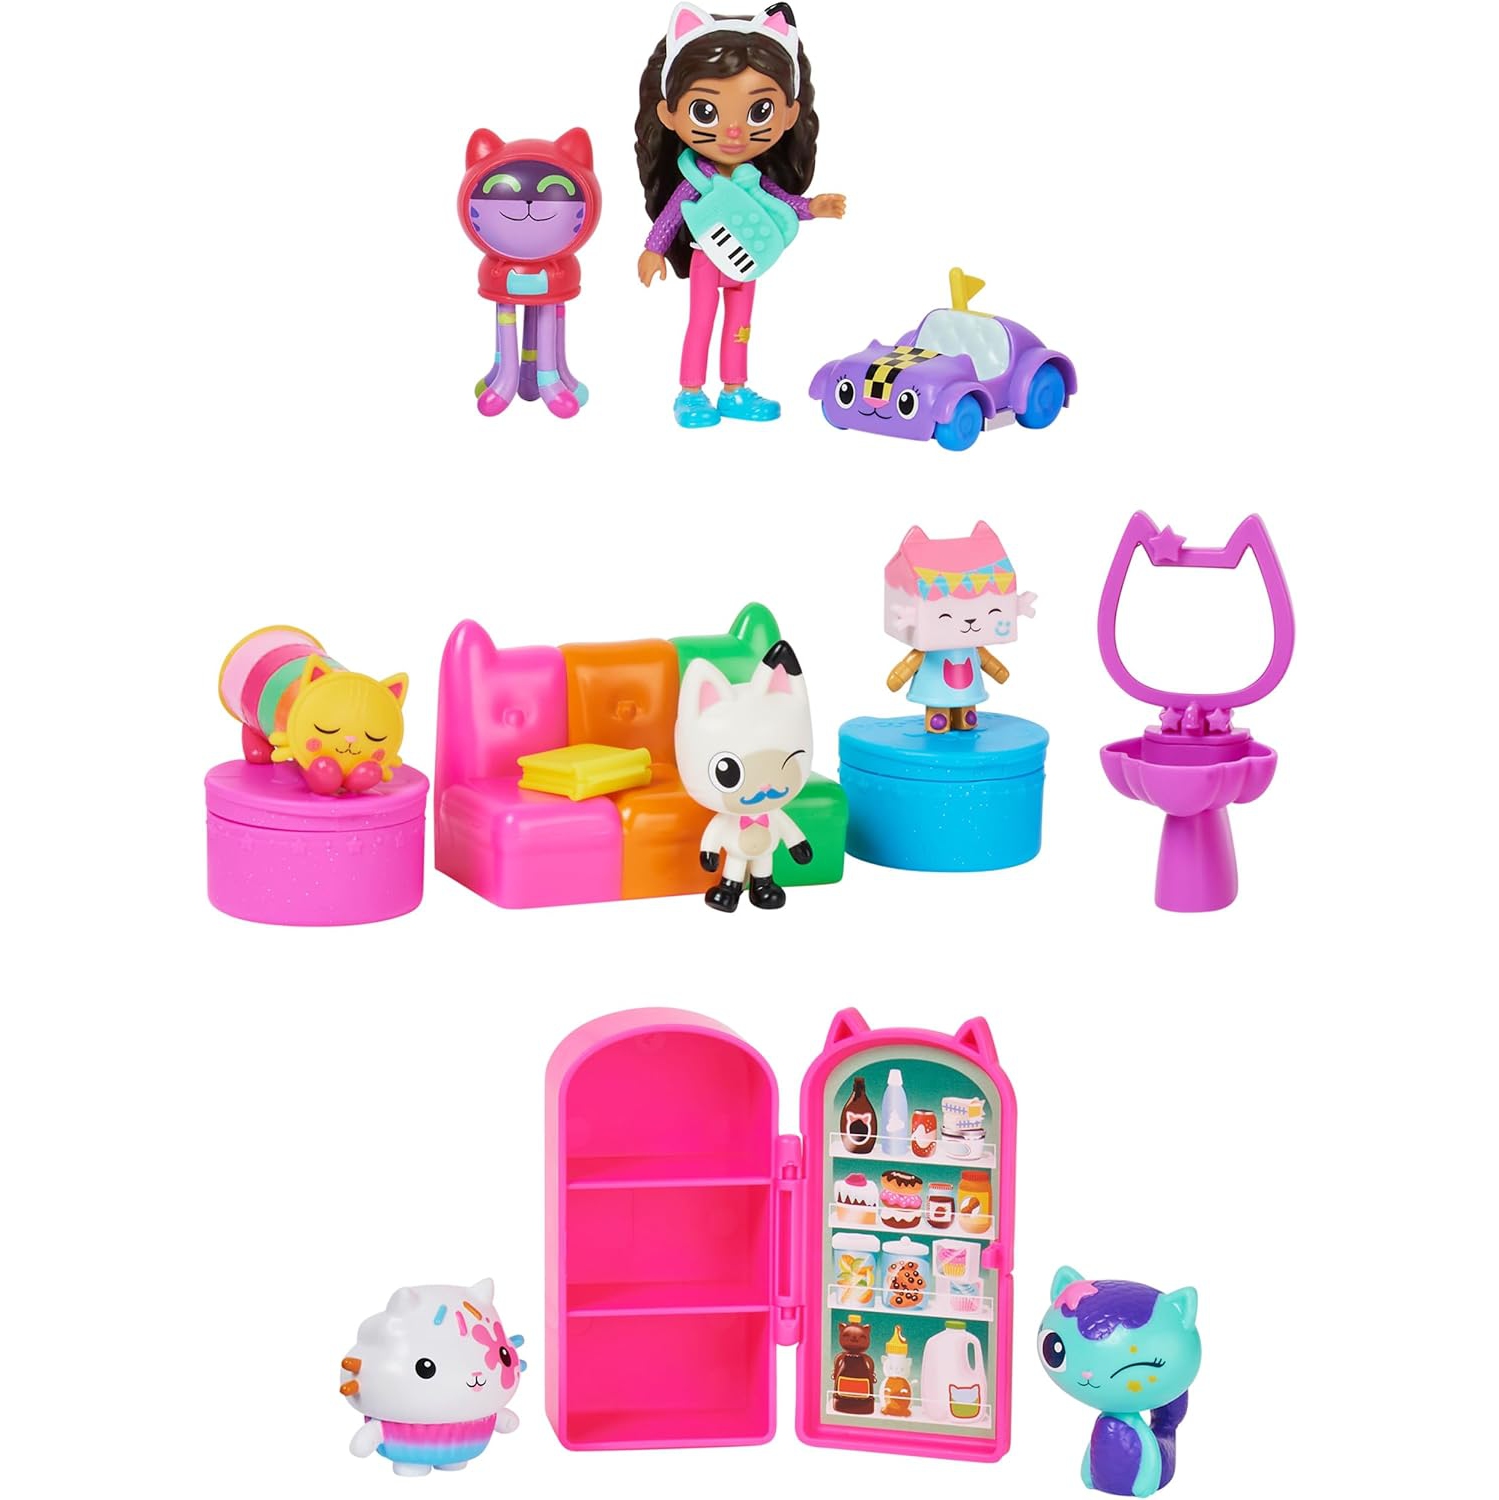 Gabby’s Dollhouse, Surprise Pack, Toy Figures and Dollhouse Furniture, Kids Toys for Girls and Boys Ages 3 and up